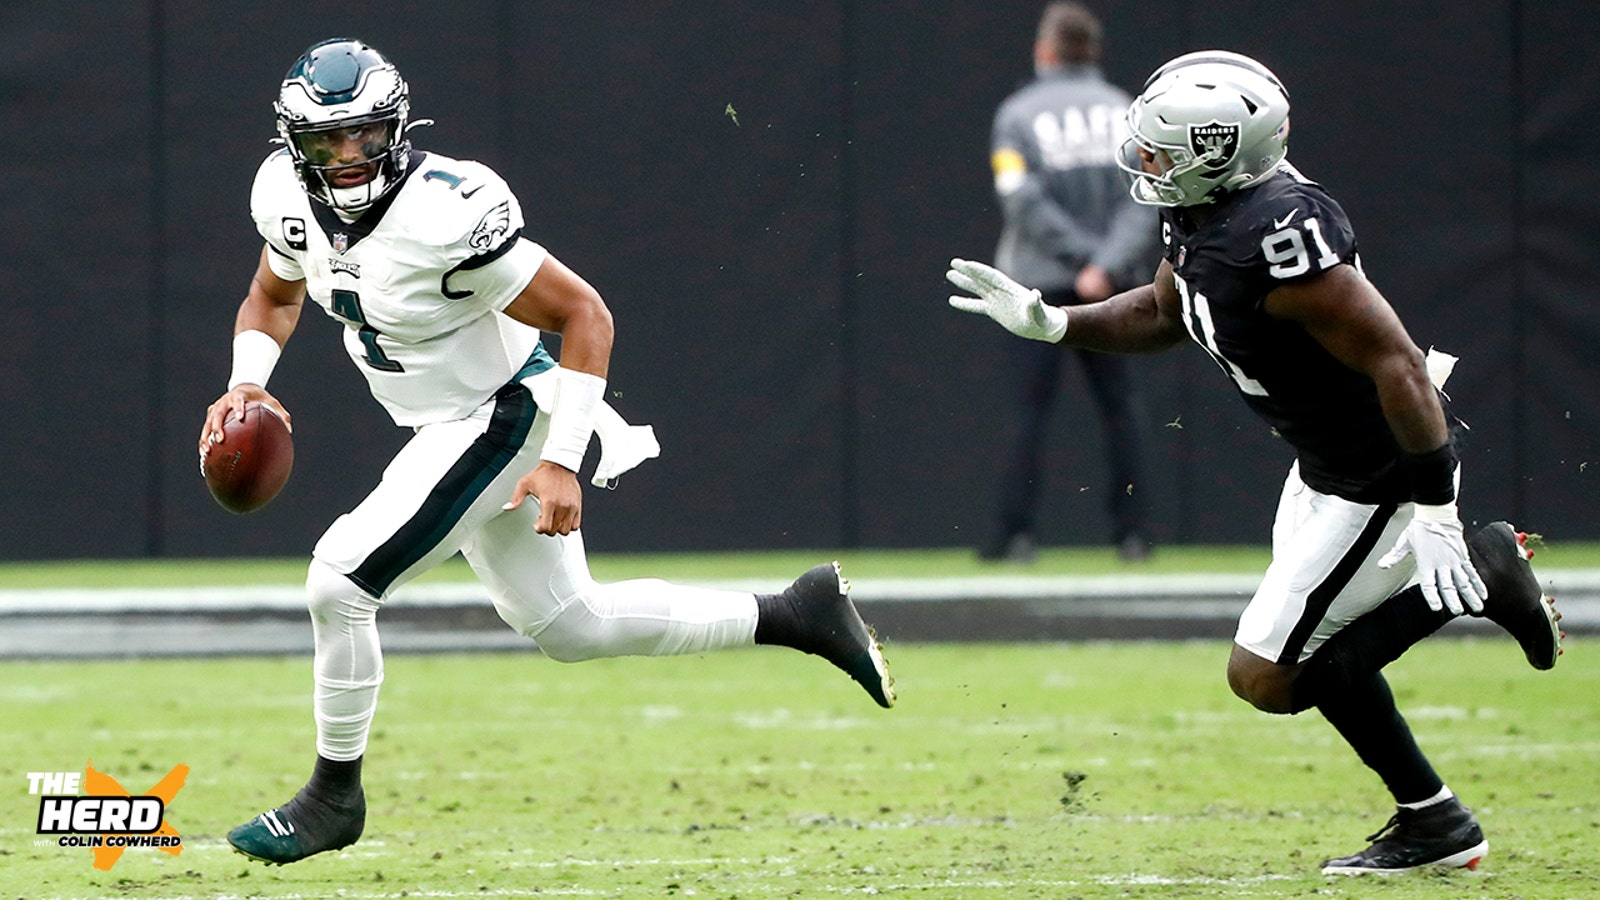 Raiders, Eagles expected to improve on last year's playoff run